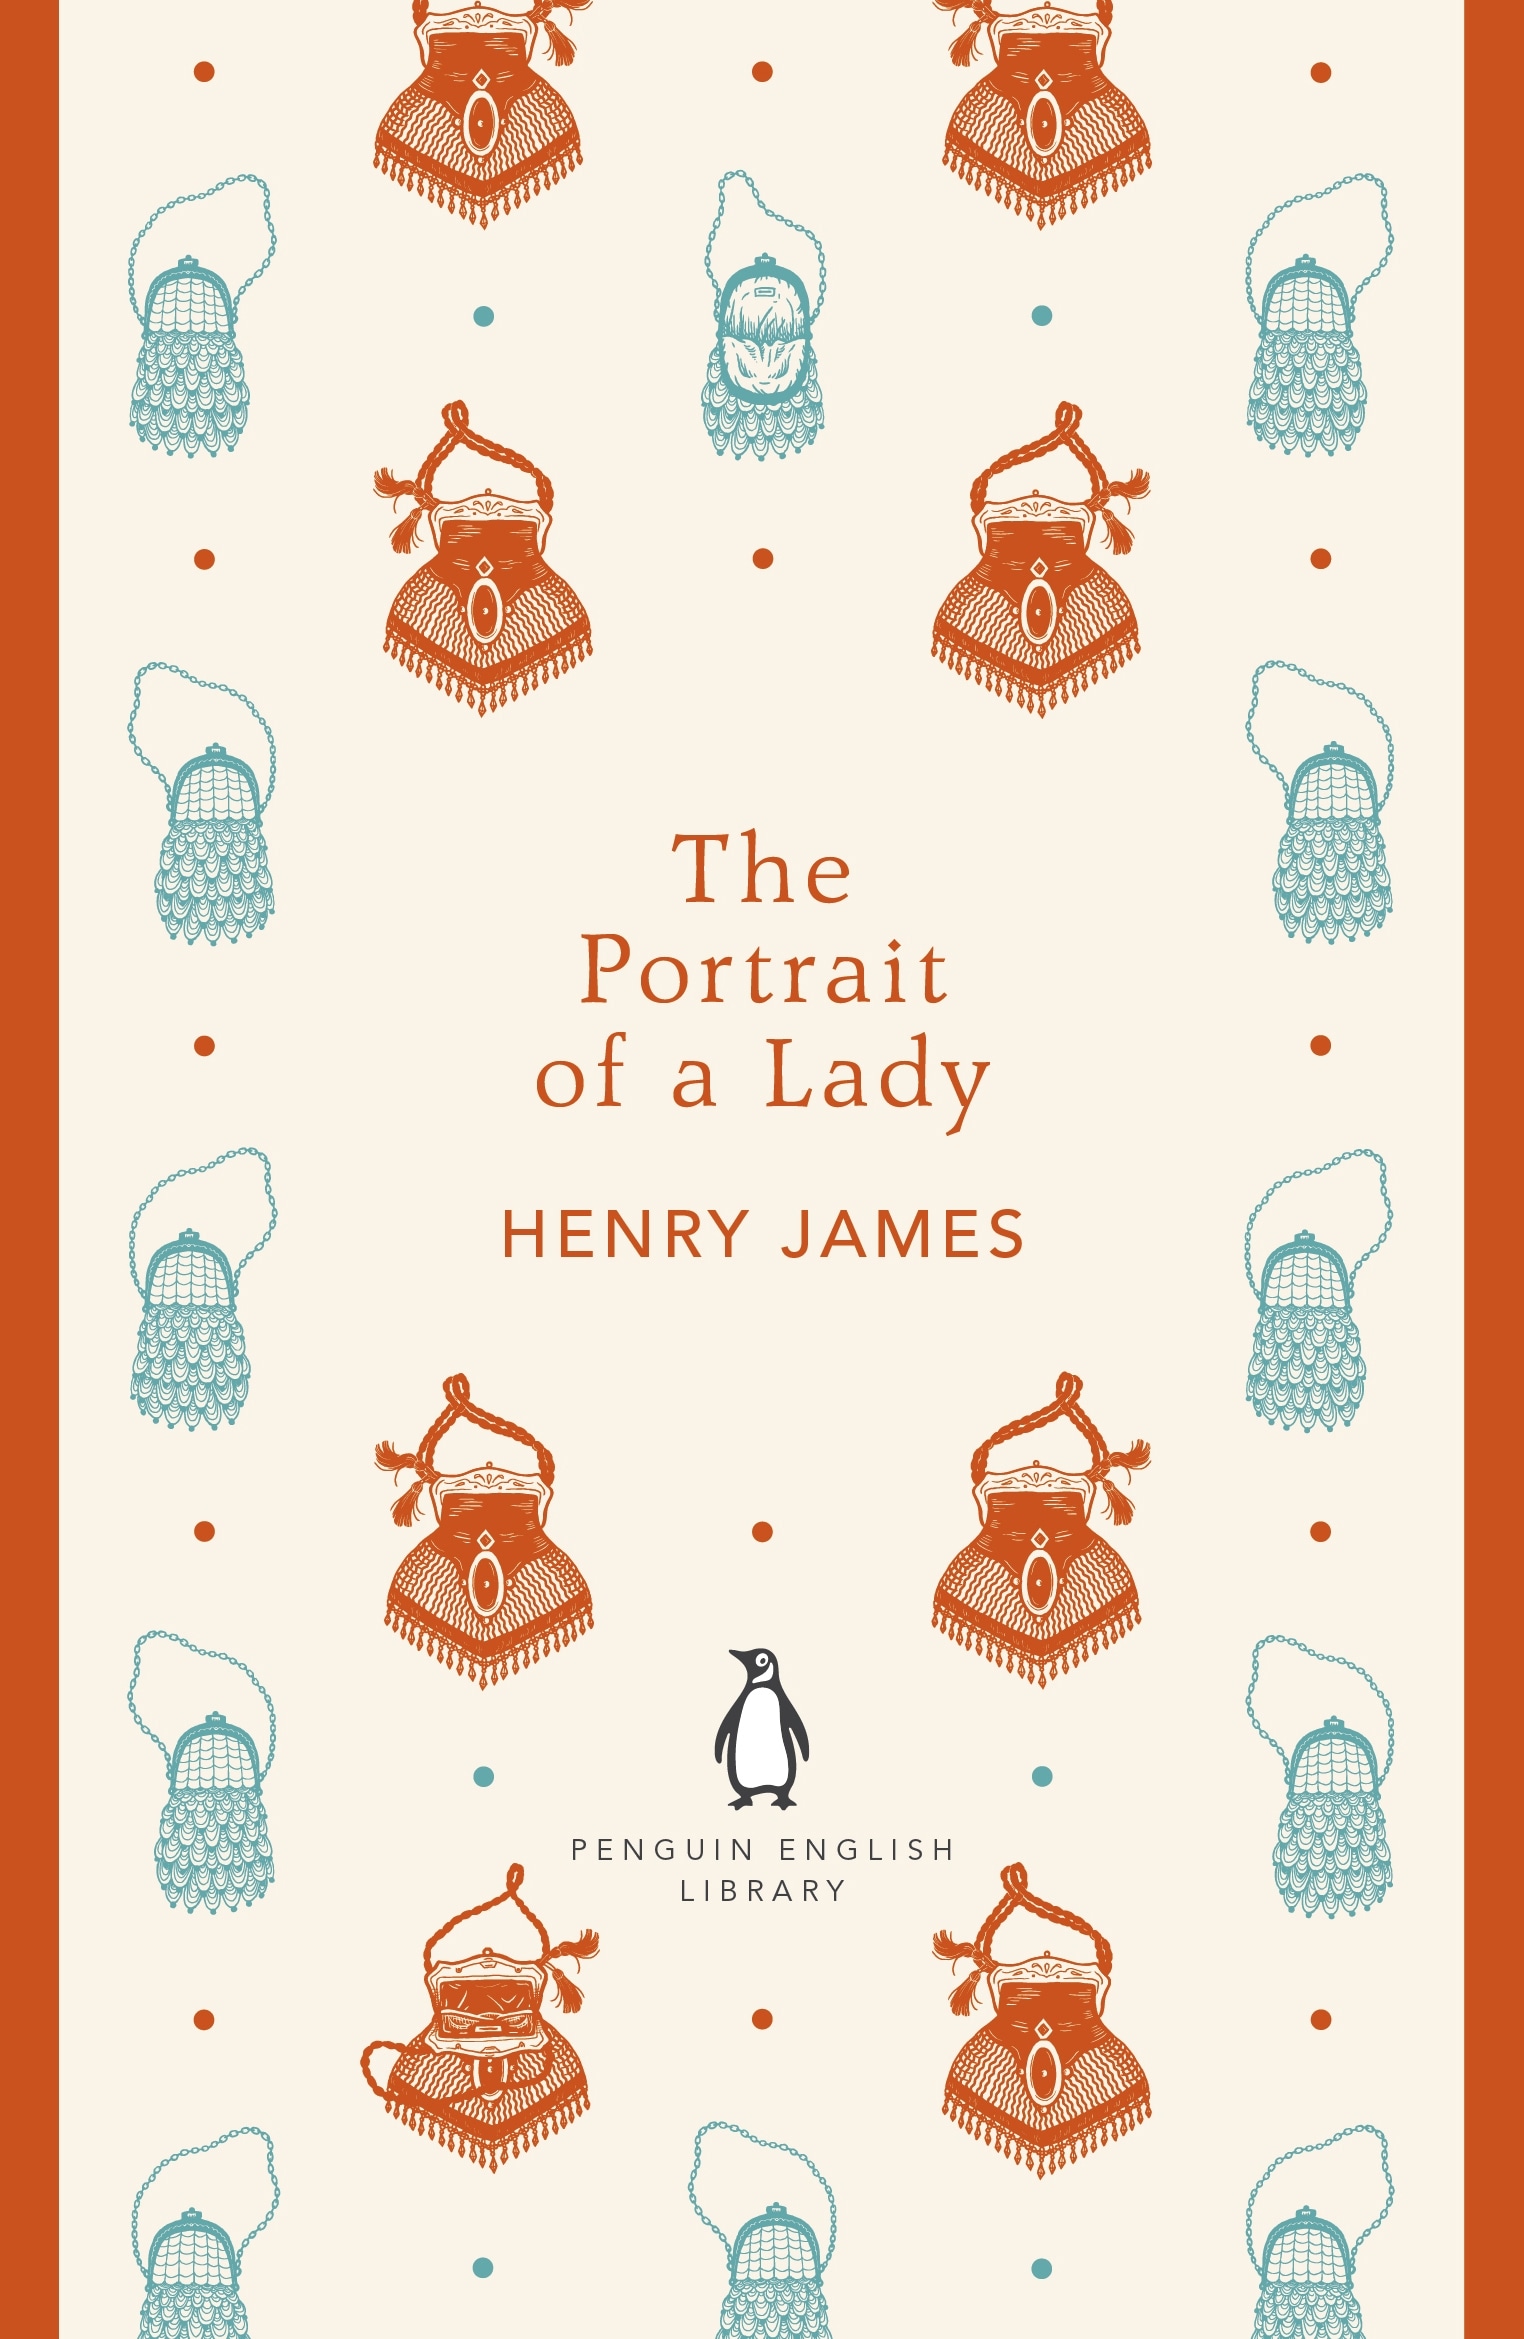 Book “The Portrait of a Lady” by Henry James — December 6, 2012